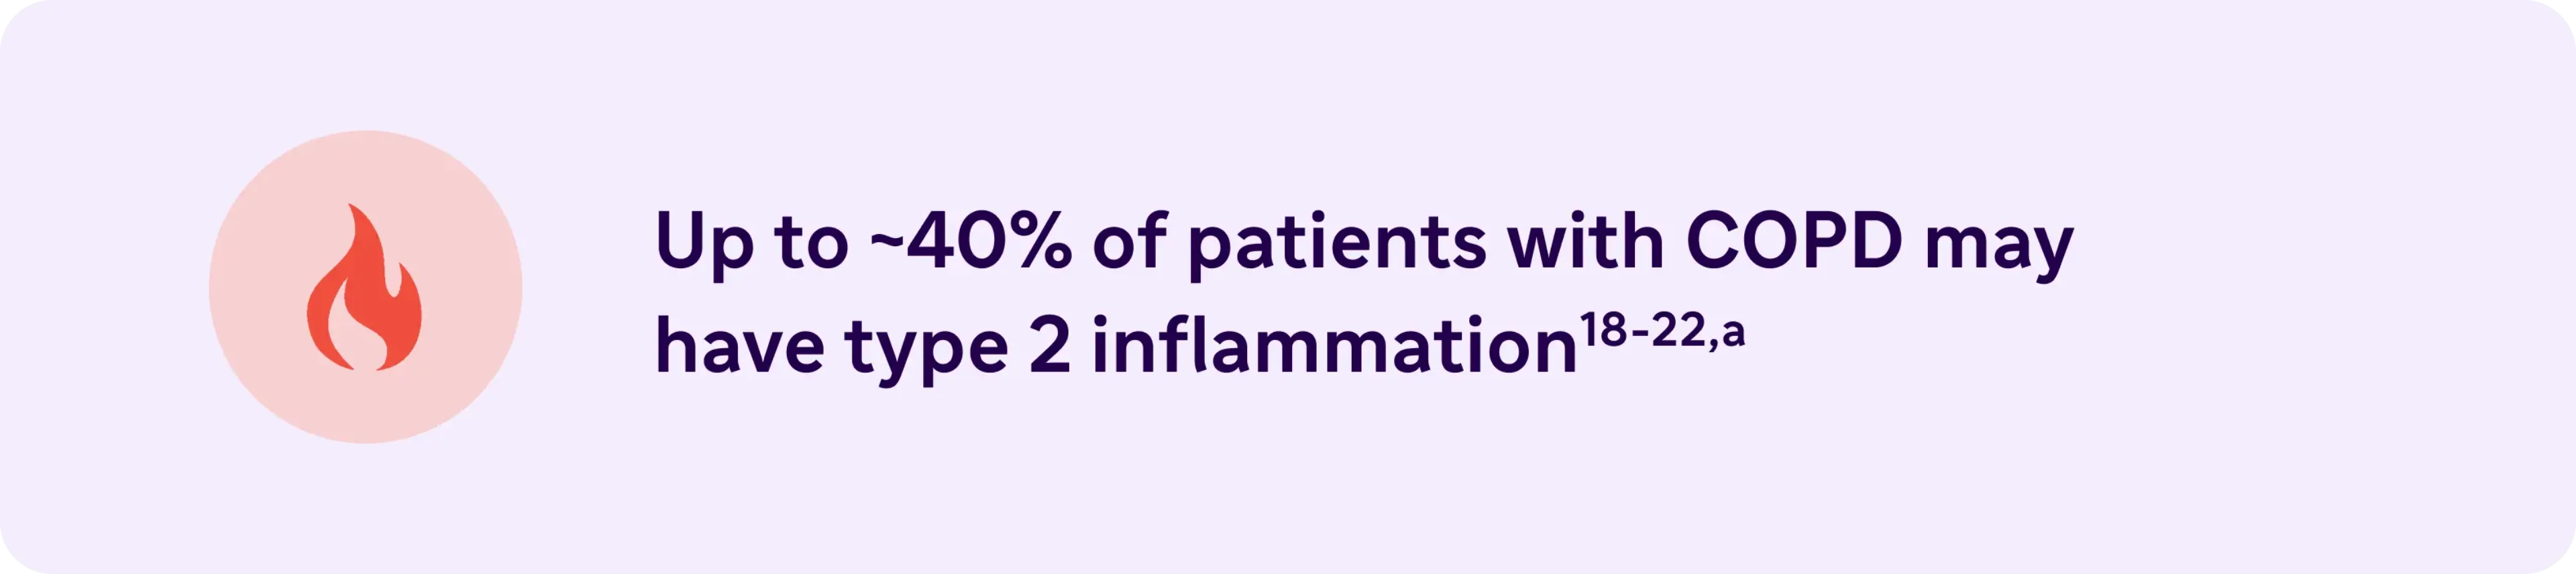 Up to ~40% of patients with COPD may have type 2 inflammation